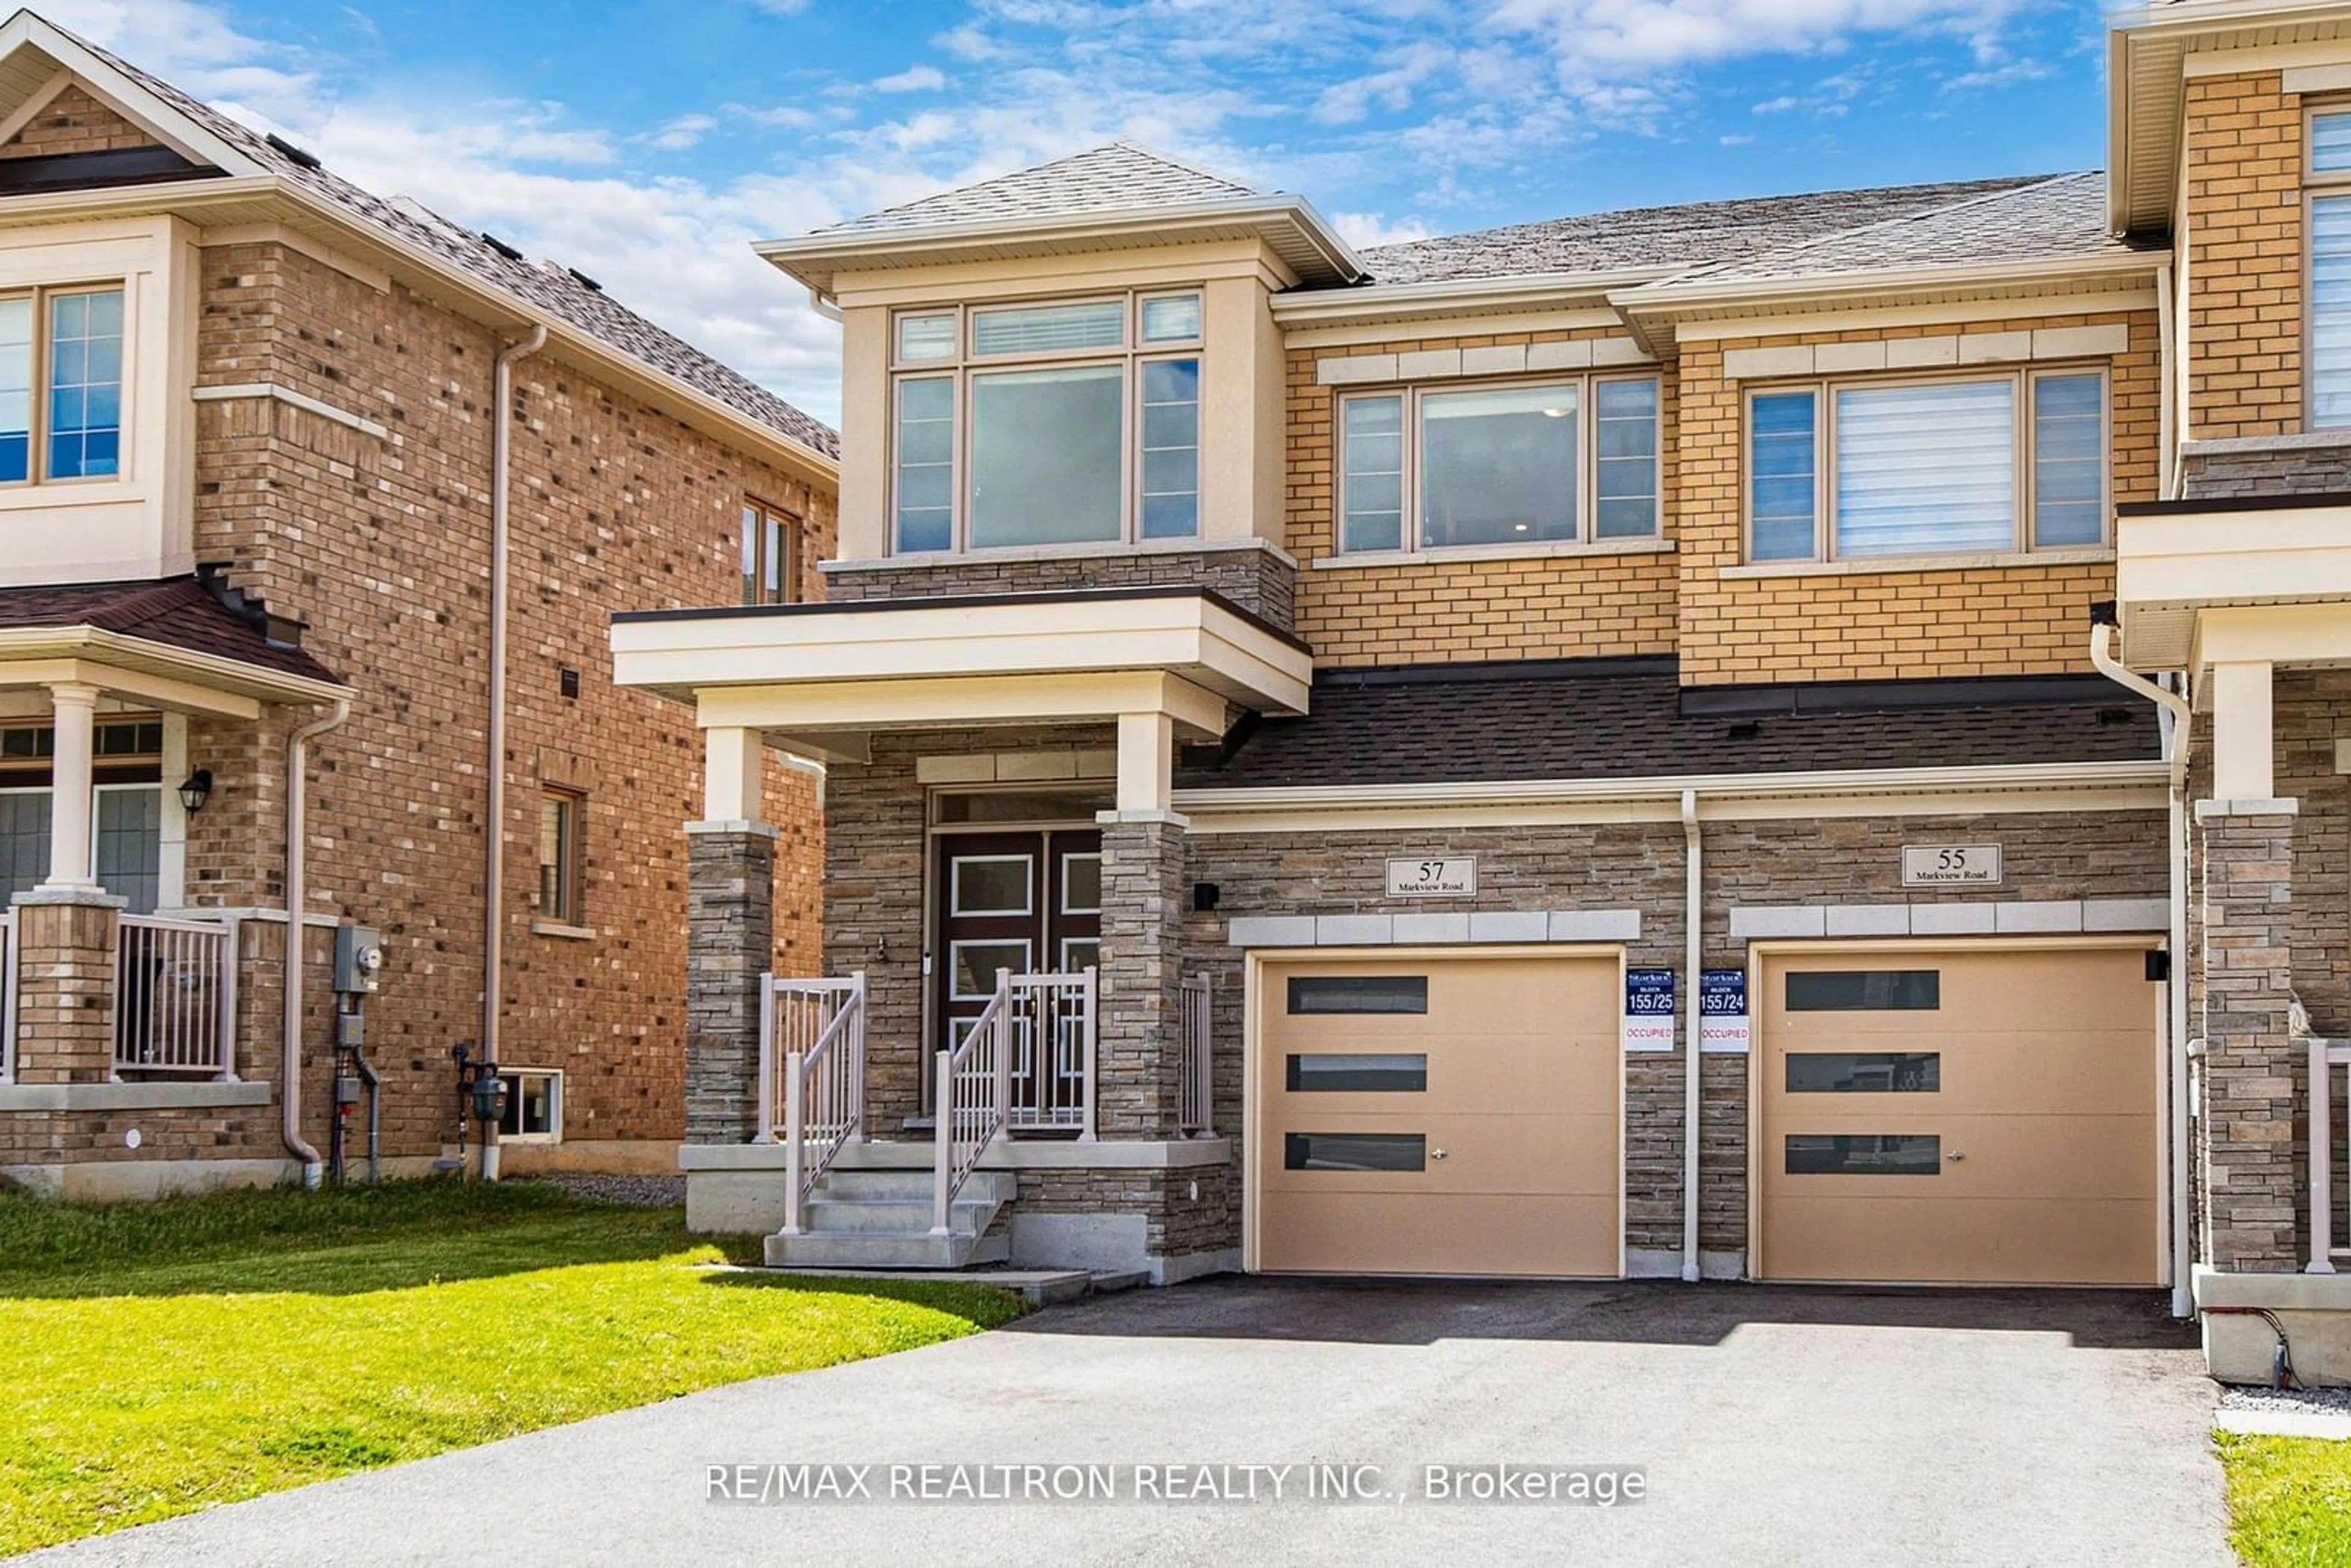 Home with brick exterior material for 57 Markview Rd, Whitchurch-Stouffville Ontario L4A 4W1